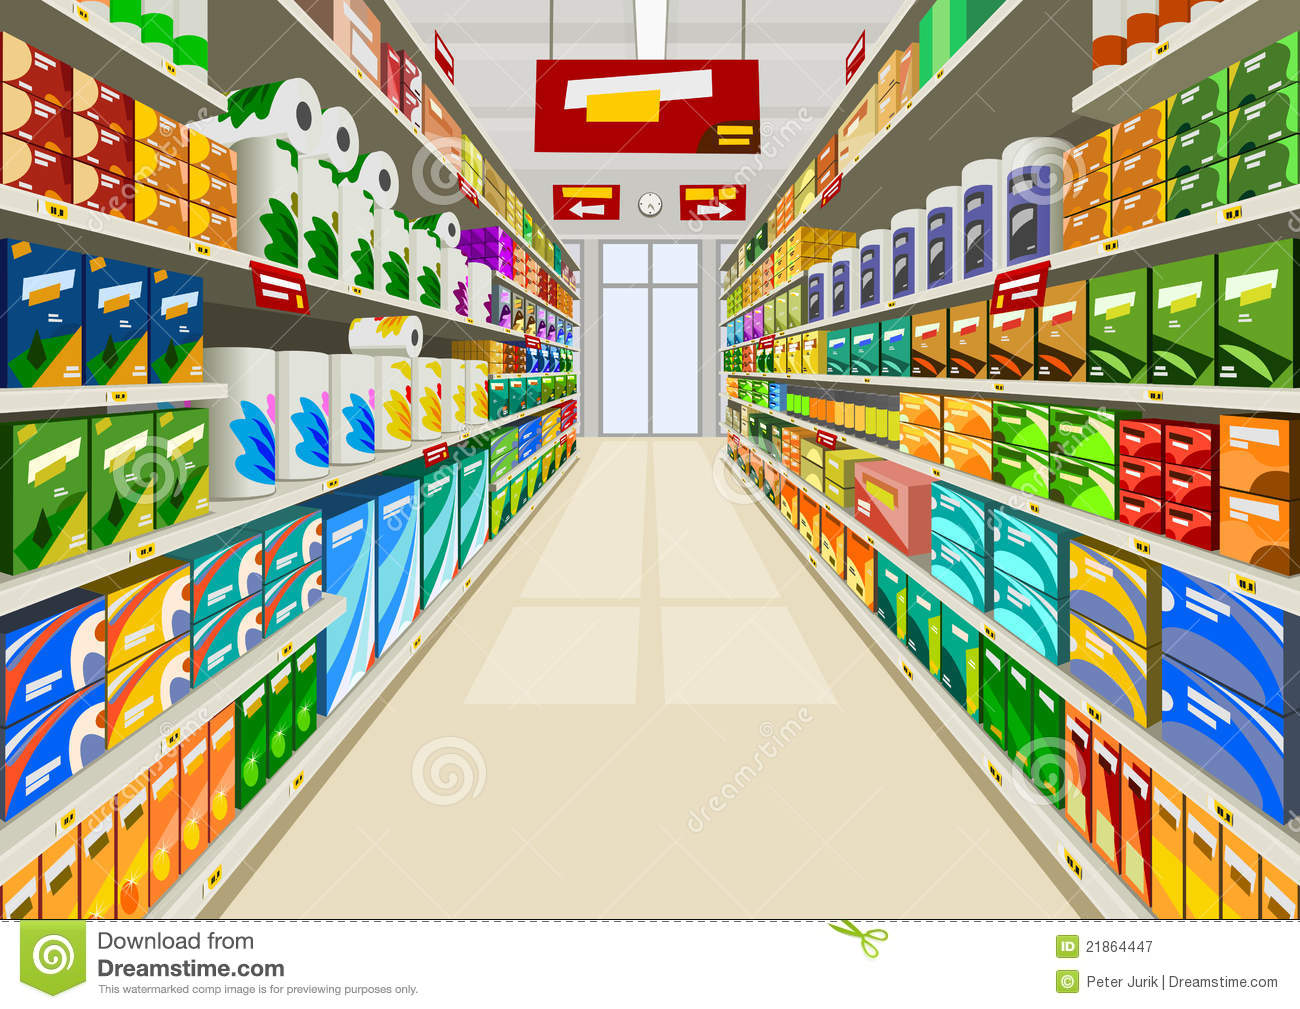 Clipart Grocery Store Jesus A